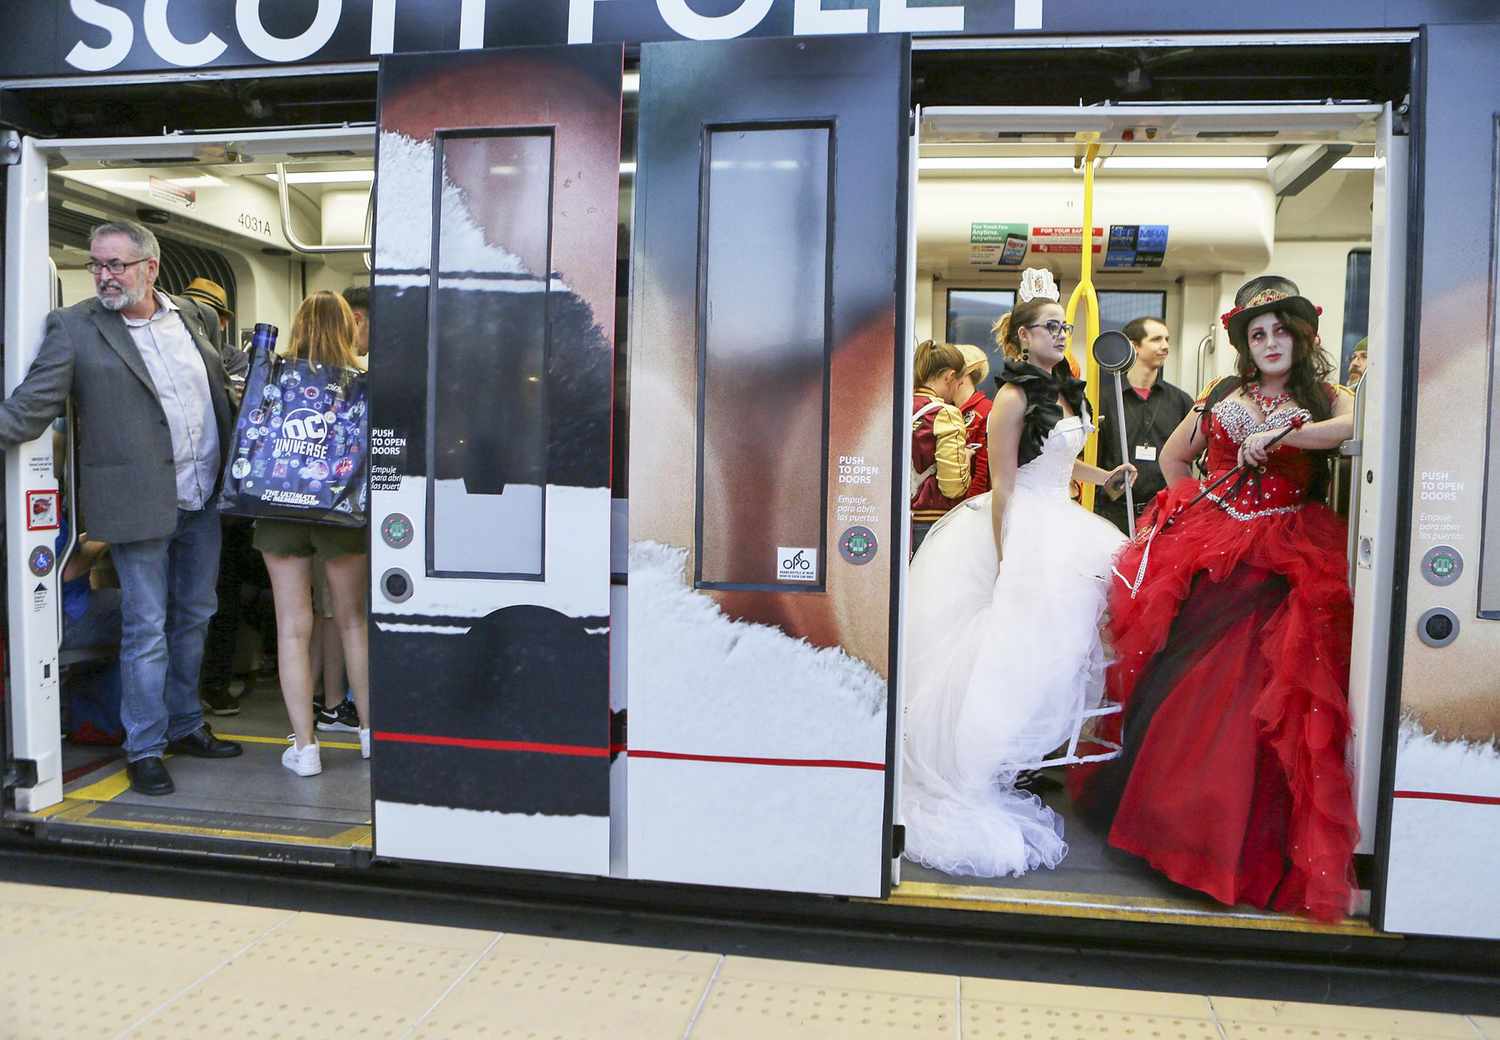 Comic-Con Fans Descend On San Diego Dressed As Their Favorite Characters